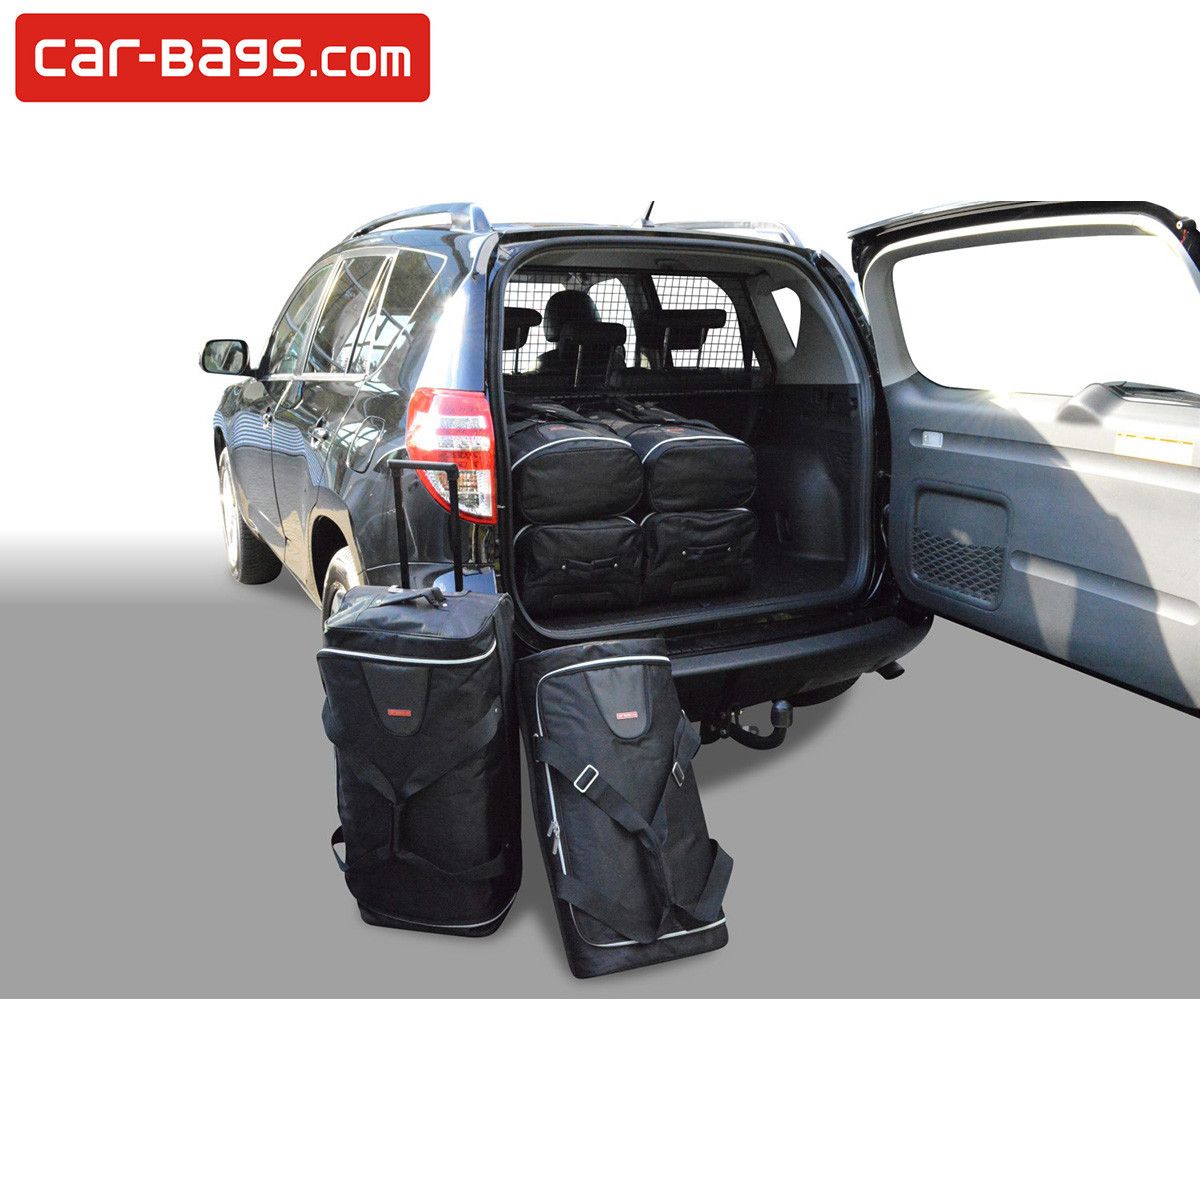 Travel bags fits Toyota RAV4 space saving fit car III Bags 379 for (6 and Car | (XA30) made covers | pcs) $ for Perfect tailor | Shop Time Covers